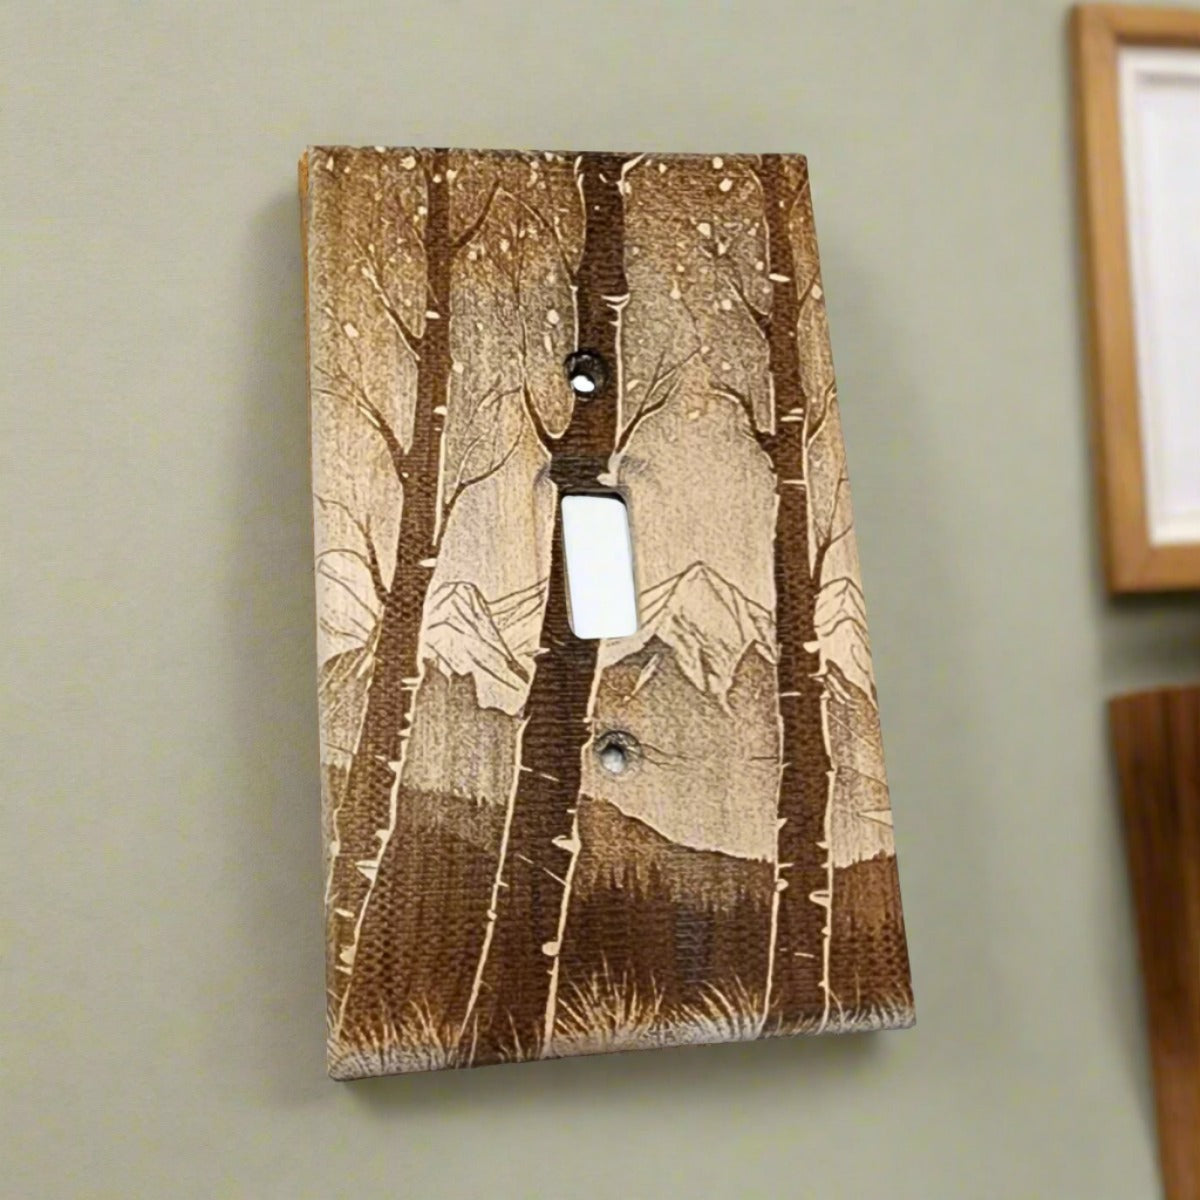 Aspen Trees Meadow Switch Cover Single - Hats Signs Patches 3D printing Engraving